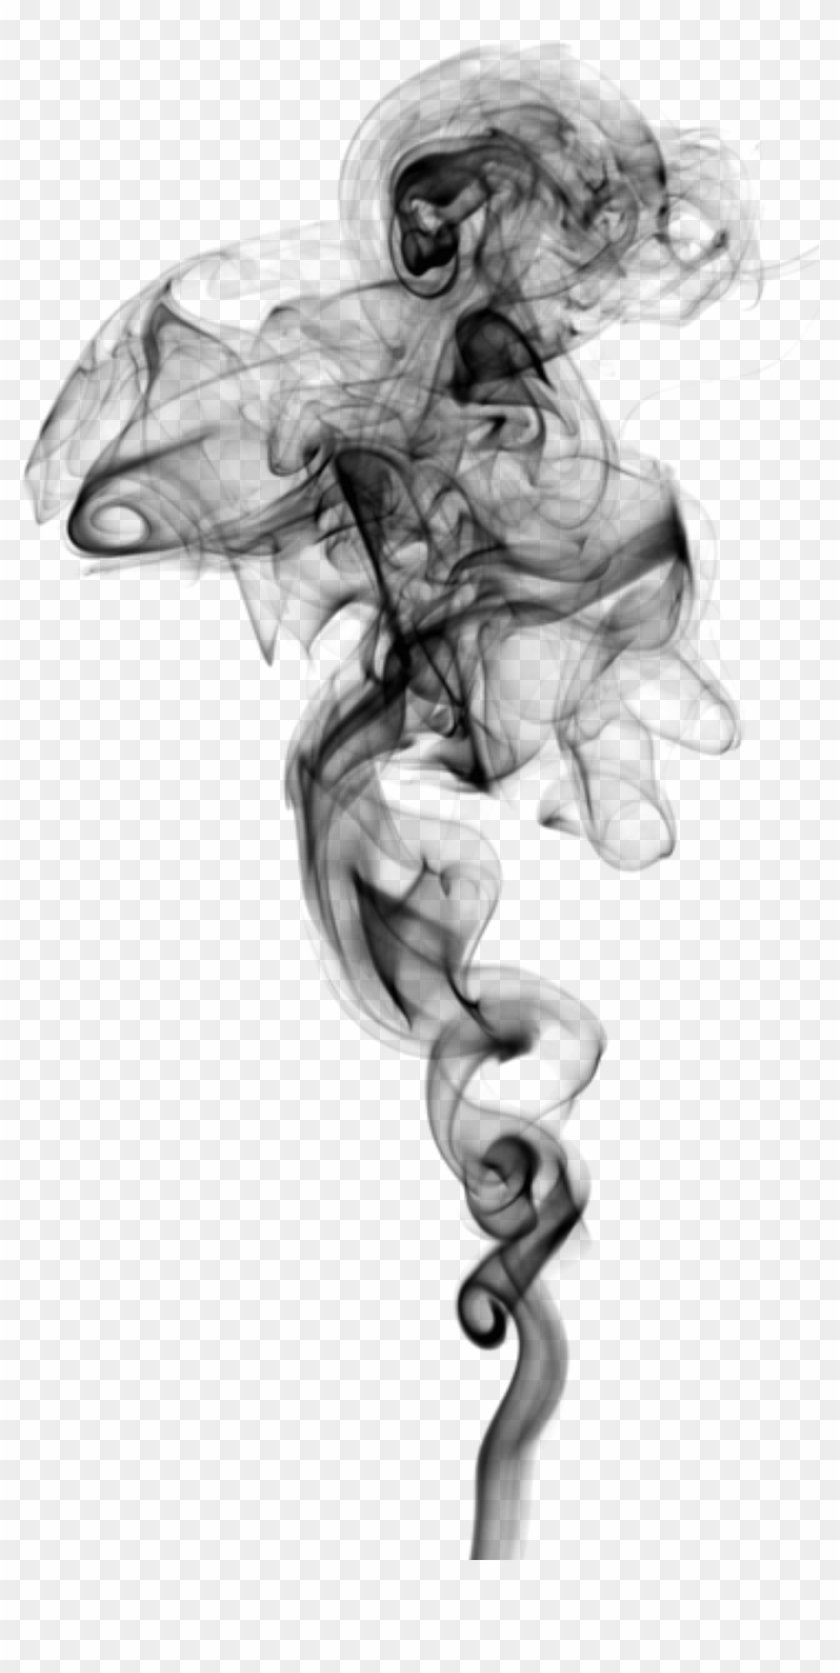 Download Smoke Png Images Background - Smoke Effect Transparent Background Clipart